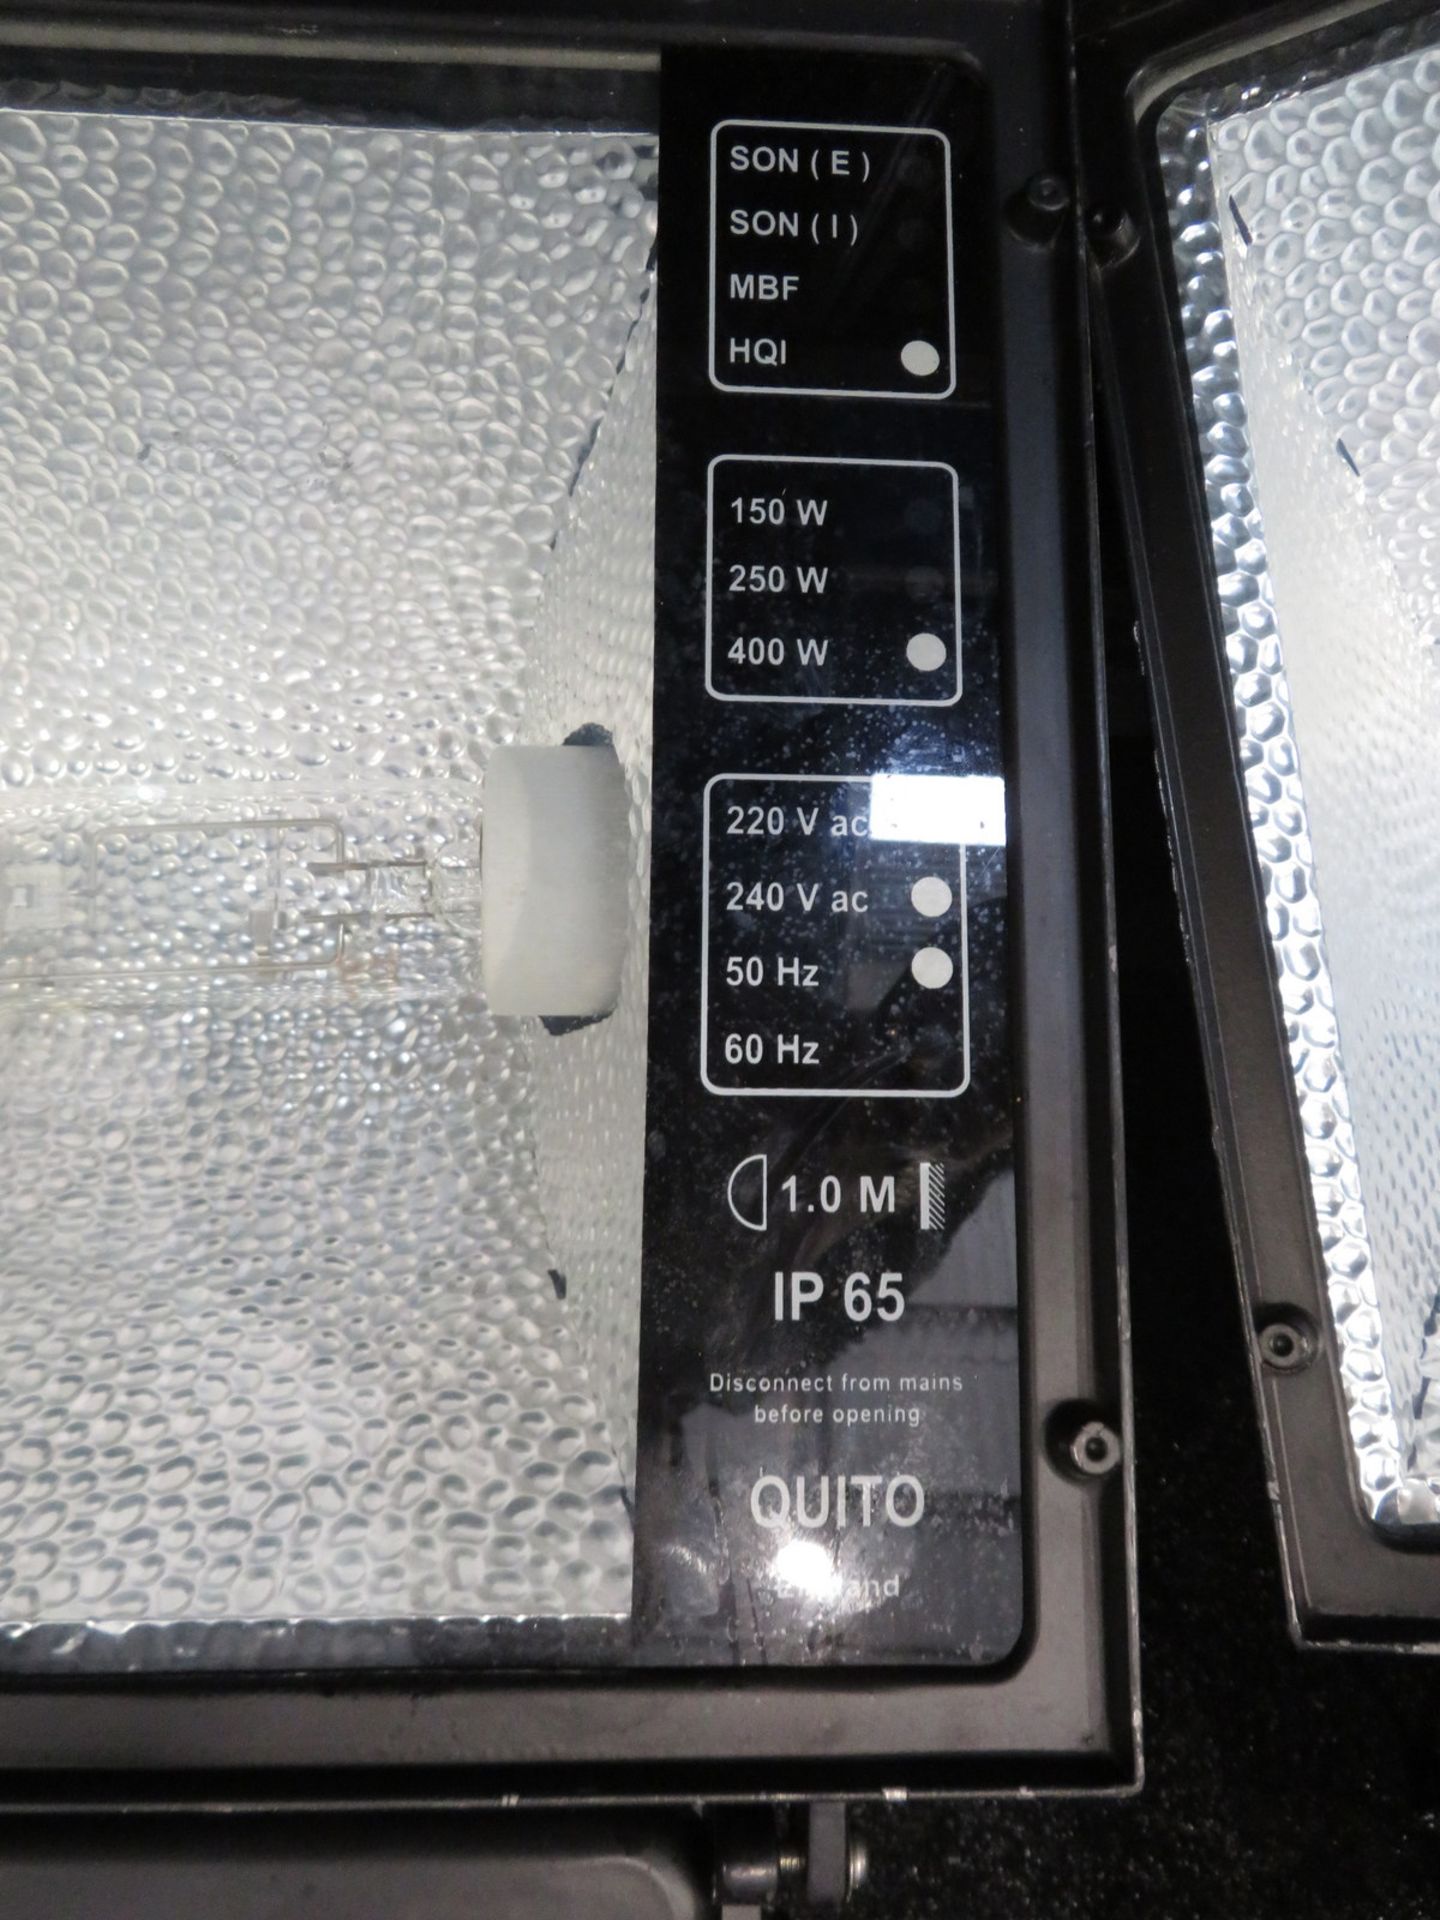 6x HQI 400w Floodlights in flight case. Includes safety bonds. Working condition. - Image 6 of 7